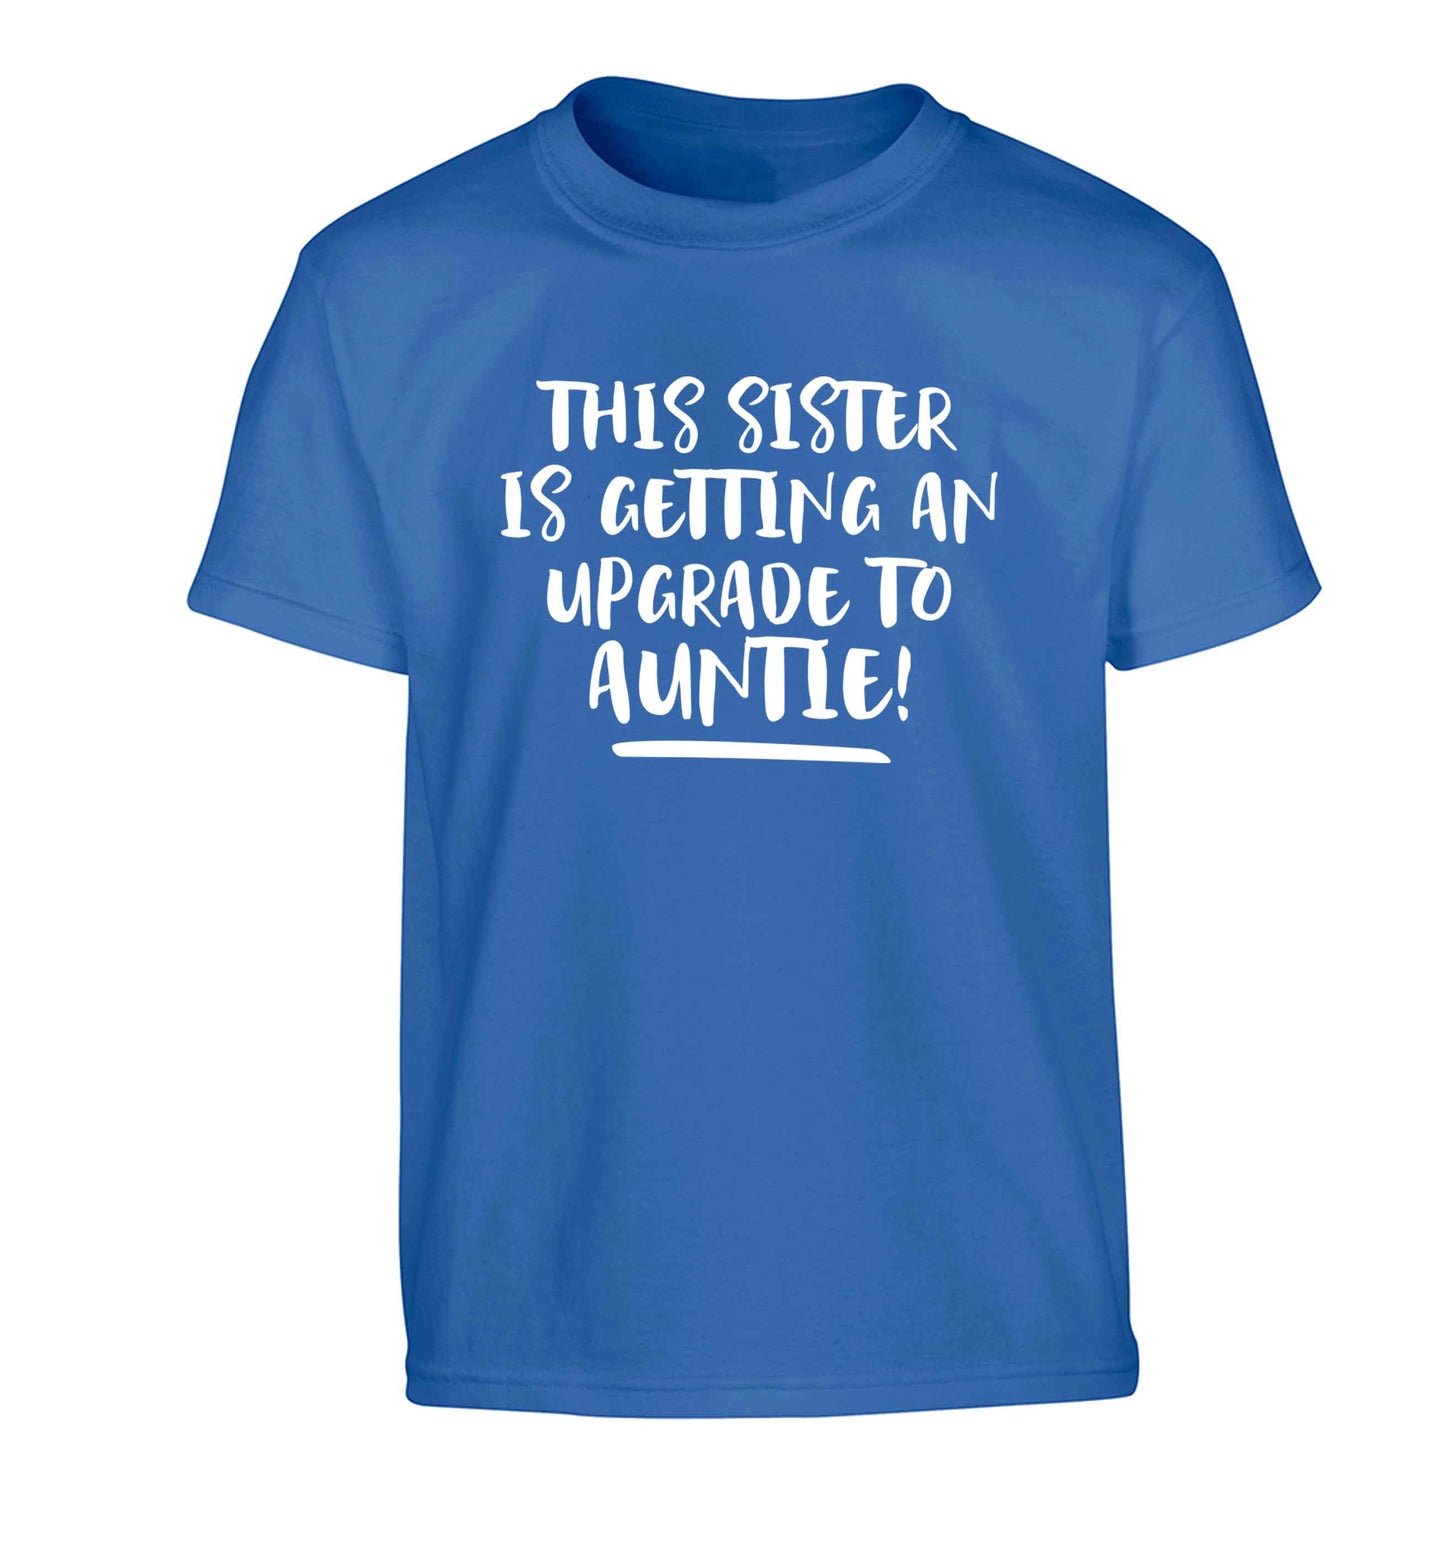 This sister is getting an upgrade to auntie! Children's blue Tshirt 12-13 Years